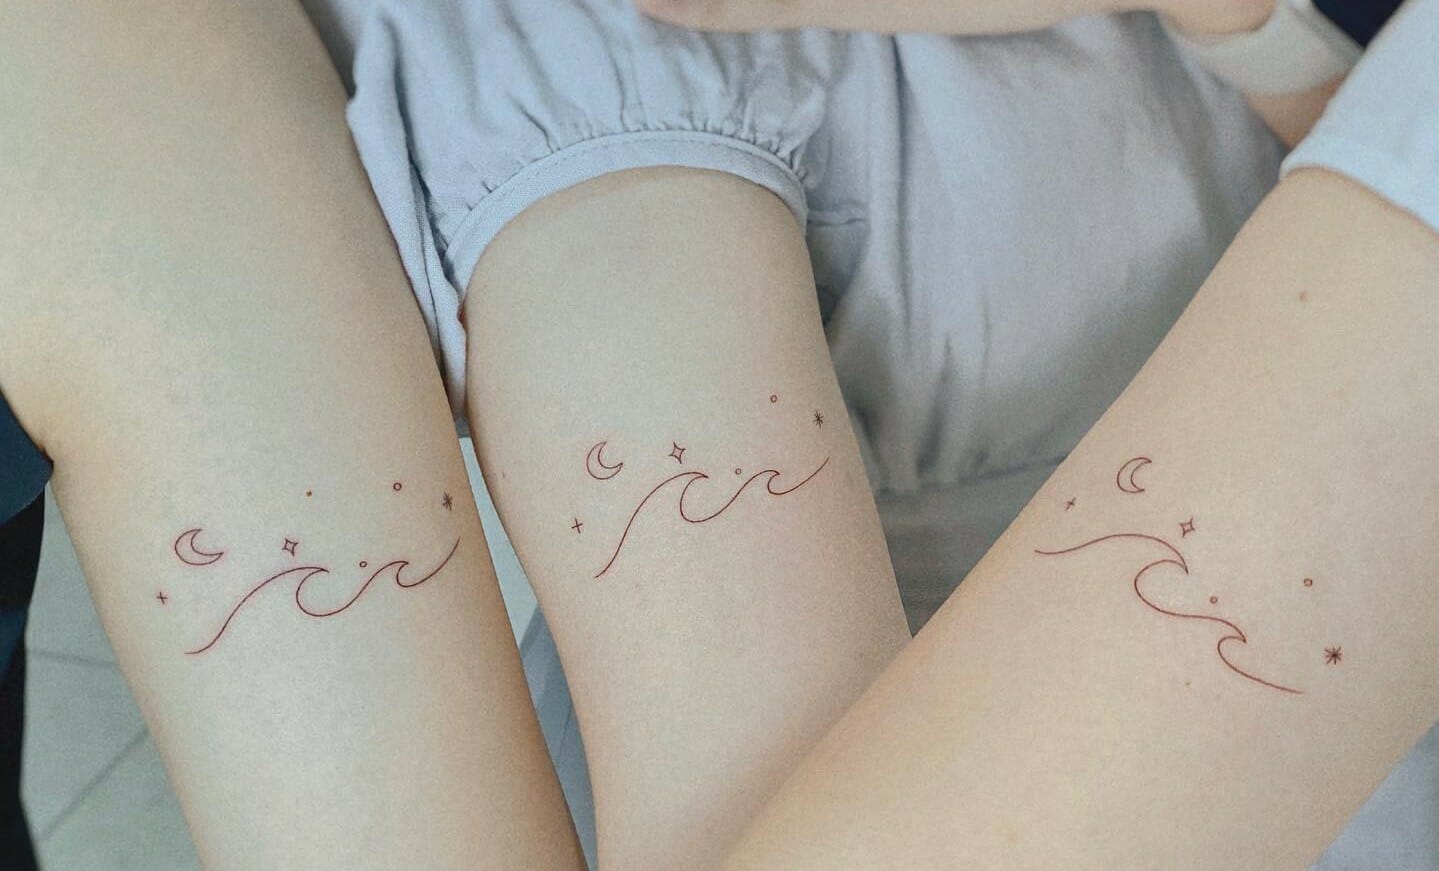 100 Exhilarating Best Friend Tattoos To Bond Over In 2023!